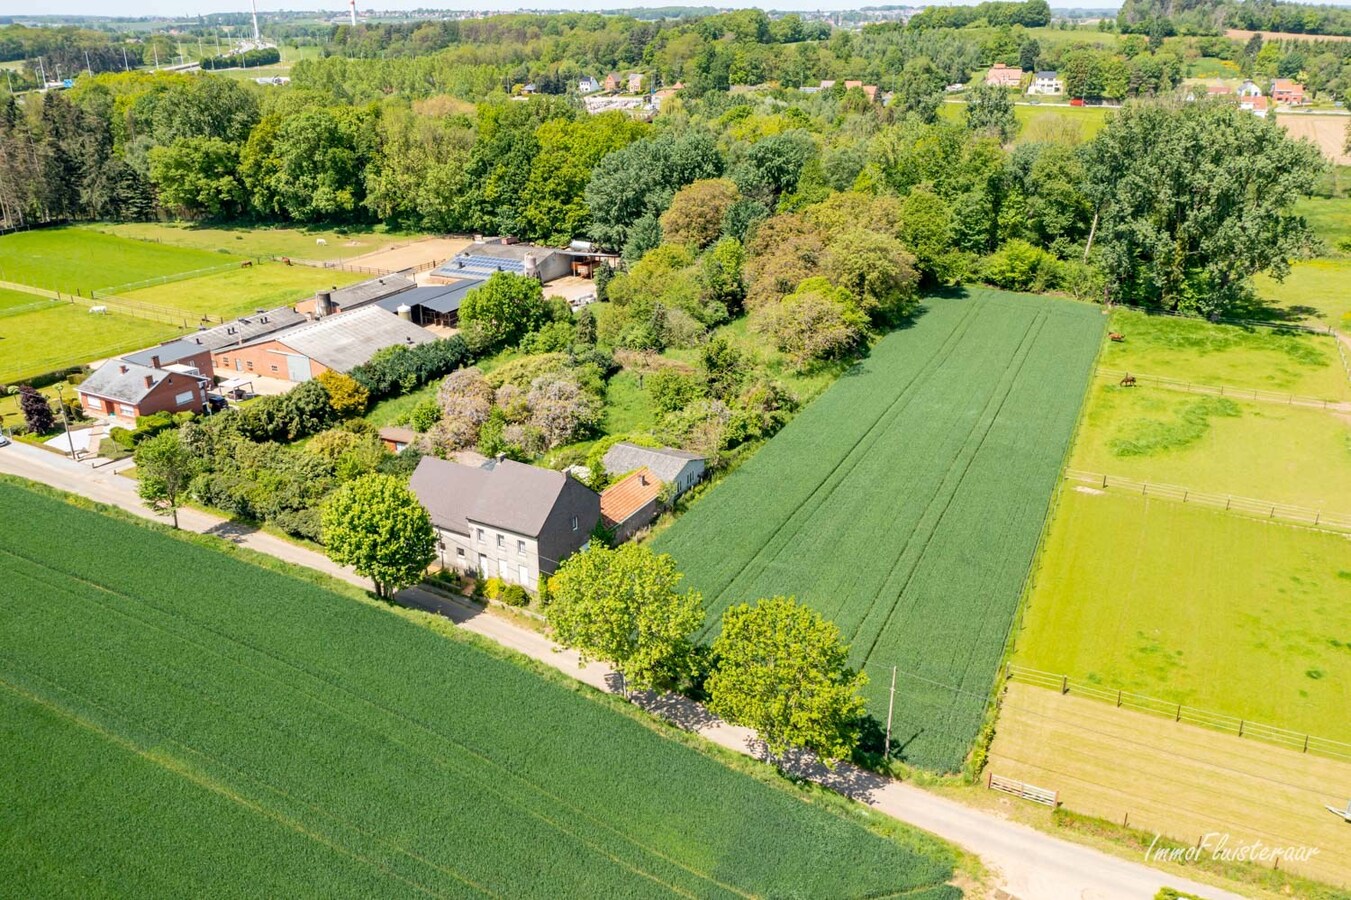 Quiet and rural located property with outbuildings on approx. 1.28ha in Bekkevoort (Flemish Brabant) 